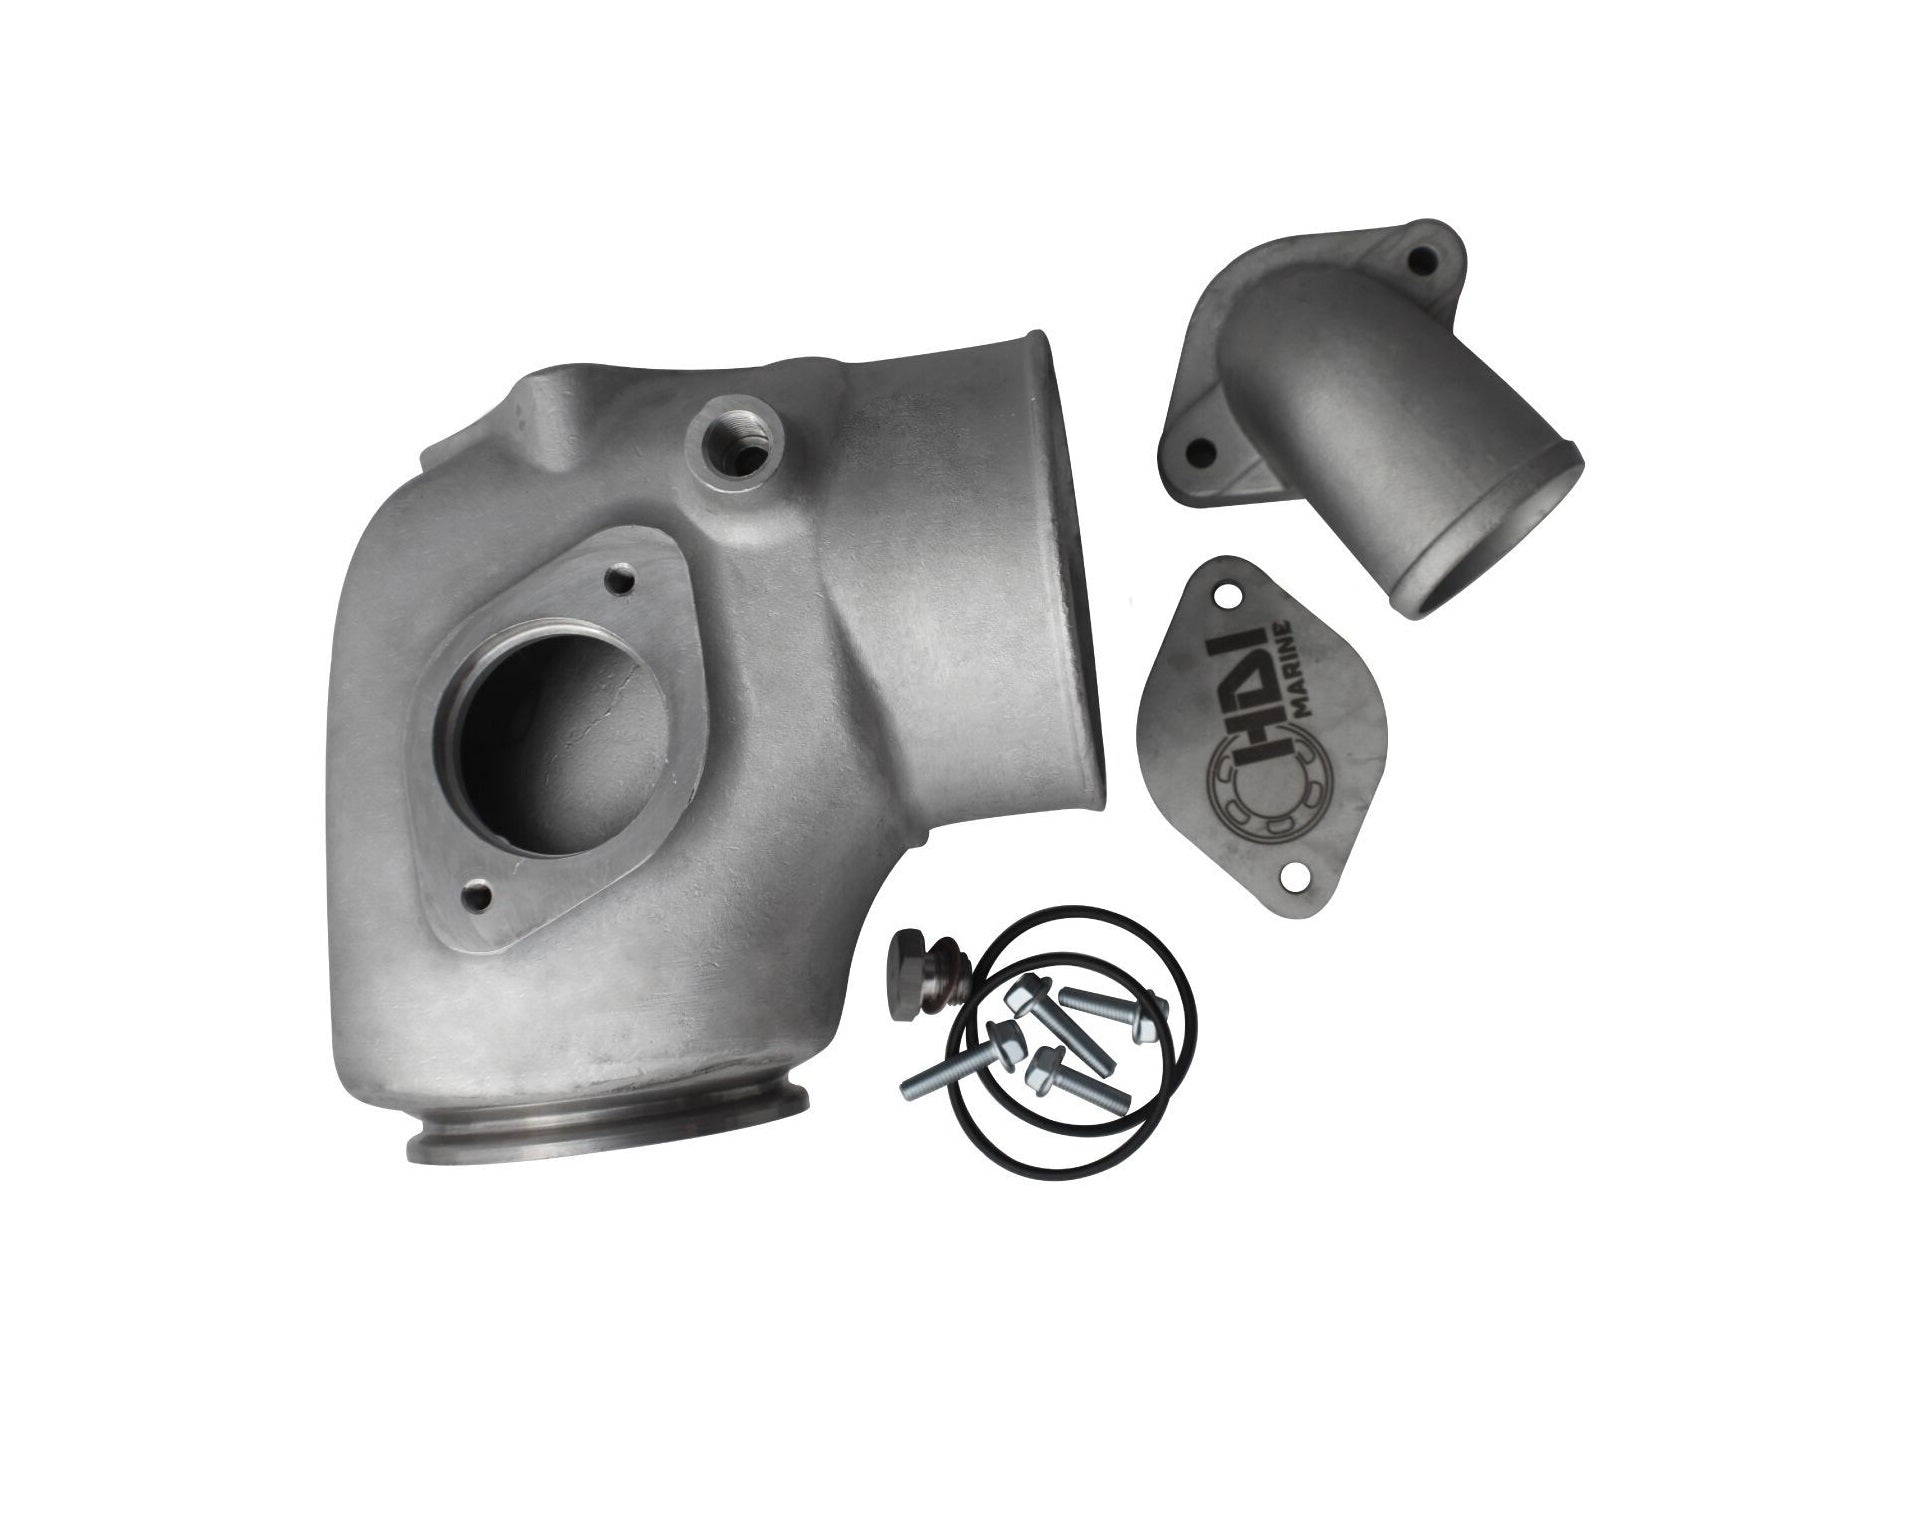 Volvo Penta D4 Mixing Elbow Kit 22948832 Replacement HDI D4